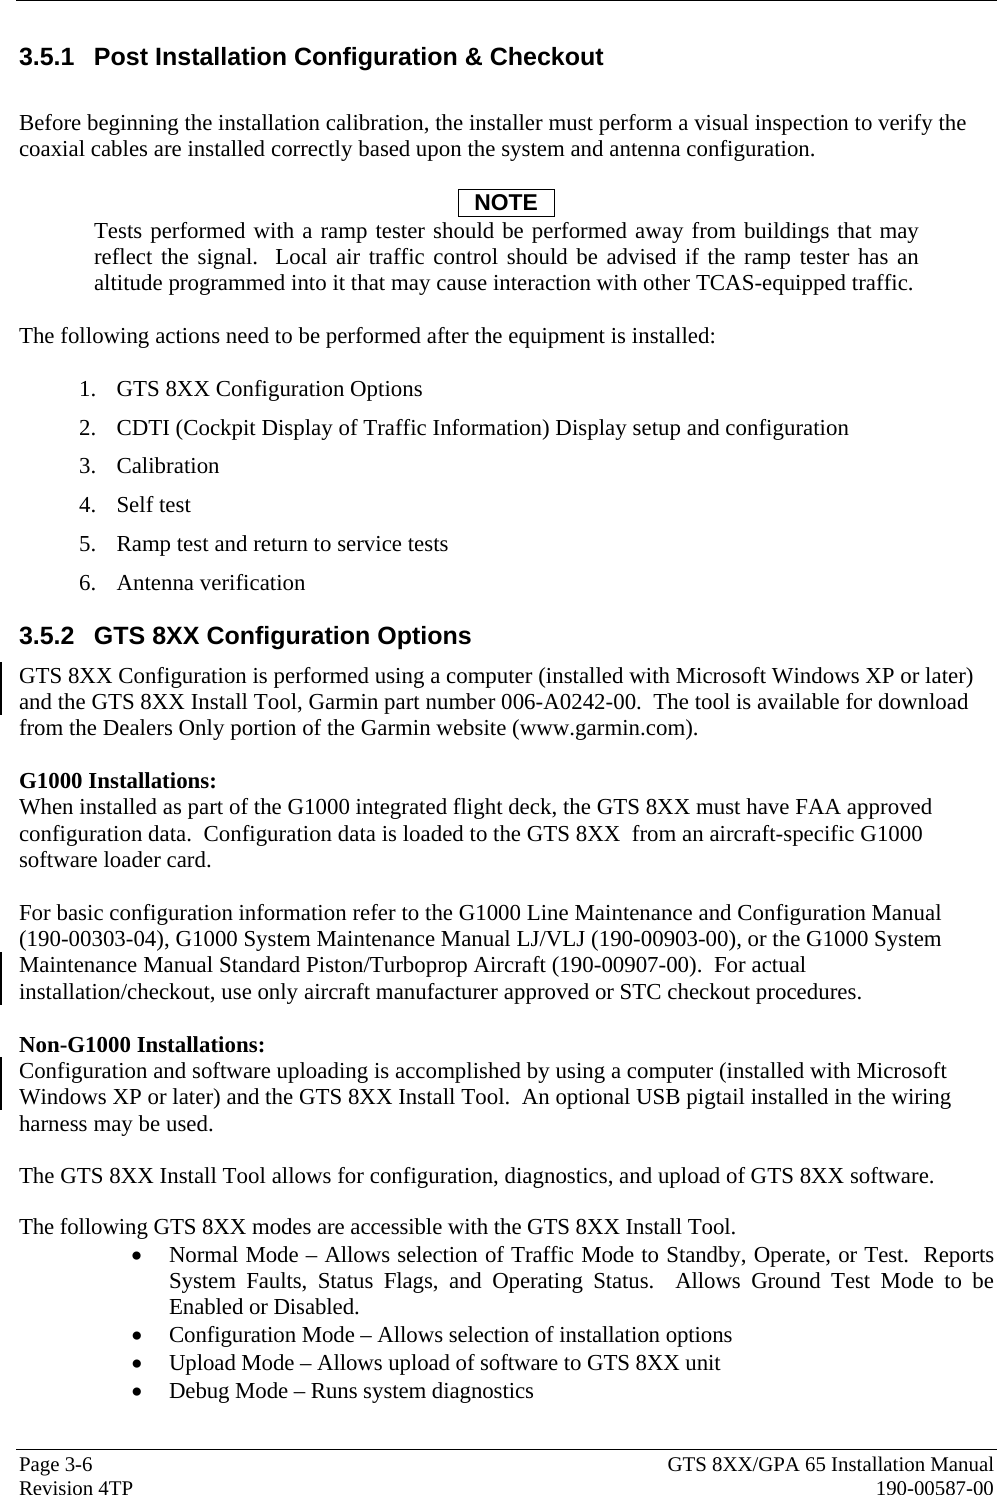  Page 3-6  GTS 8XX/GPA 65 Installation Manual Revision 4TP  190-00587-00 3.5.1  Post Installation Configuration &amp; Checkout   Before beginning the installation calibration, the installer must perform a visual inspection to verify the coaxial cables are installed correctly based upon the system and antenna configuration.  NOTE Tests performed with a ramp tester should be performed away from buildings that may reflect the signal.  Local air traffic control should be advised if the ramp tester has an altitude programmed into it that may cause interaction with other TCAS-equipped traffic.  The following actions need to be performed after the equipment is installed:  1. GTS 8XX Configuration Options 2. CDTI (Cockpit Display of Traffic Information) Display setup and configuration 3. Calibration 4. Self test 5. Ramp test and return to service tests 6. Antenna verification 3.5.2  GTS 8XX Configuration Options GTS 8XX Configuration is performed using a computer (installed with Microsoft Windows XP or later) and the GTS 8XX Install Tool, Garmin part number 006-A0242-00.  The tool is available for download from the Dealers Only portion of the Garmin website (www.garmin.com).   G1000 Installations: When installed as part of the G1000 integrated flight deck, the GTS 8XX must have FAA approved configuration data.  Configuration data is loaded to the GTS 8XX  from an aircraft-specific G1000 software loader card.  For basic configuration information refer to the G1000 Line Maintenance and Configuration Manual (190-00303-04), G1000 System Maintenance Manual LJ/VLJ (190-00903-00), or the G1000 System Maintenance Manual Standard Piston/Turboprop Aircraft (190-00907-00).  For actual installation/checkout, use only aircraft manufacturer approved or STC checkout procedures.  Non-G1000 Installations: Configuration and software uploading is accomplished by using a computer (installed with Microsoft Windows XP or later) and the GTS 8XX Install Tool.  An optional USB pigtail installed in the wiring harness may be used.  The GTS 8XX Install Tool allows for configuration, diagnostics, and upload of GTS 8XX software.   The following GTS 8XX modes are accessible with the GTS 8XX Install Tool. • Normal Mode – Allows selection of Traffic Mode to Standby, Operate, or Test.  Reports System Faults, Status Flags, and Operating Status.  Allows Ground Test Mode to be Enabled or Disabled. • Configuration Mode – Allows selection of installation options • Upload Mode – Allows upload of software to GTS 8XX unit • Debug Mode – Runs system diagnostics 